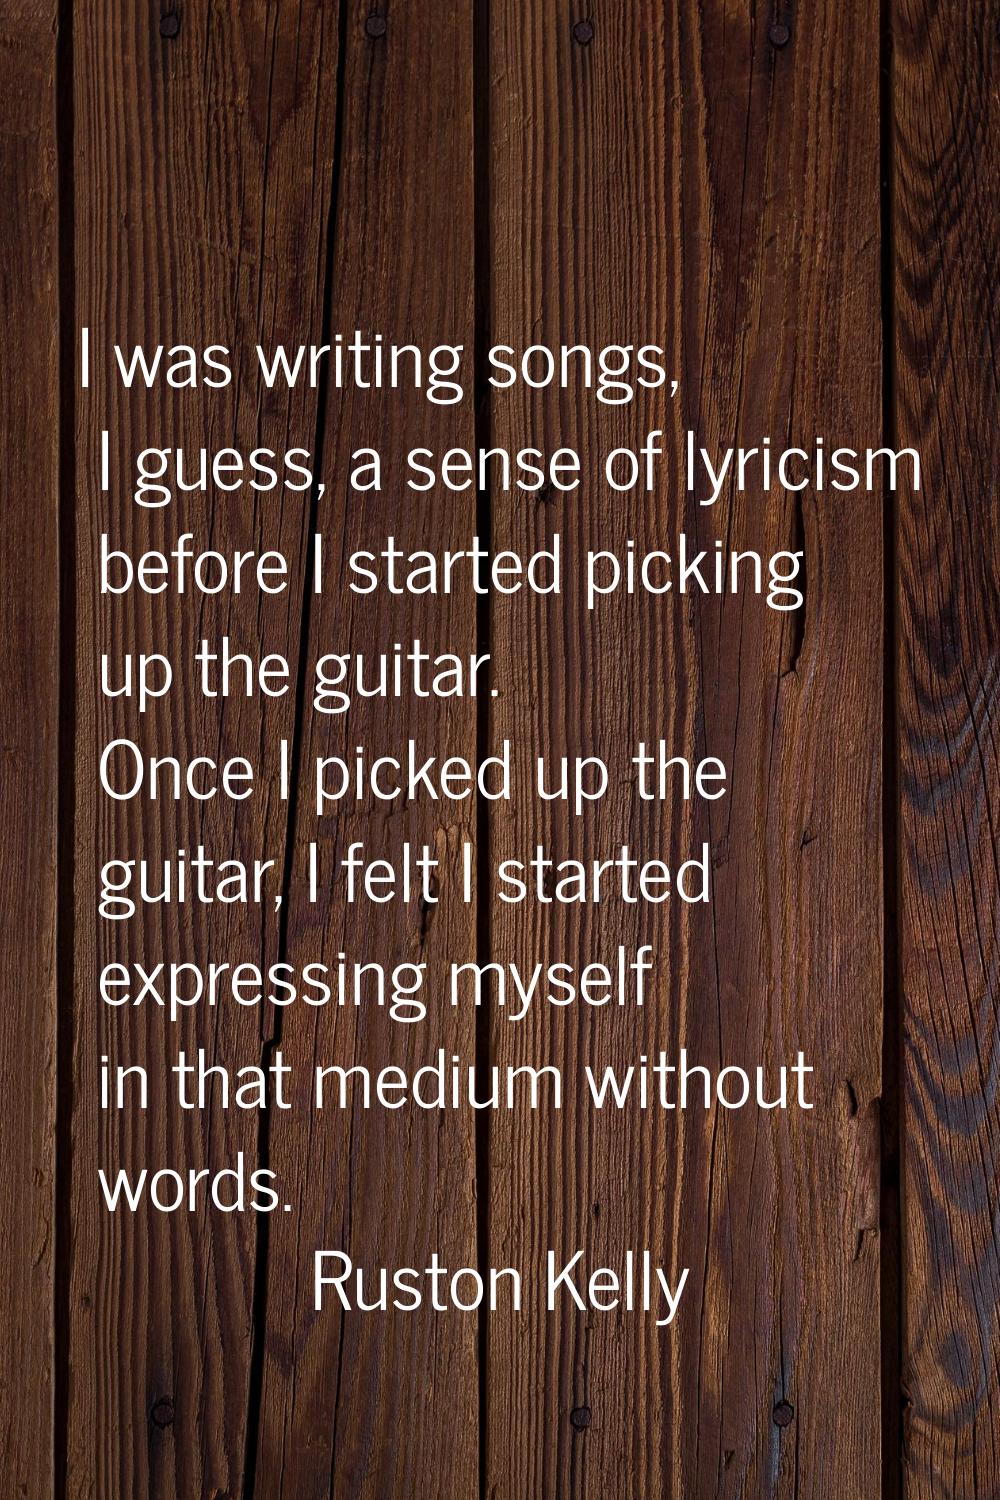 I was writing songs, I guess, a sense of lyricism before I started picking up the guitar. Once I pi